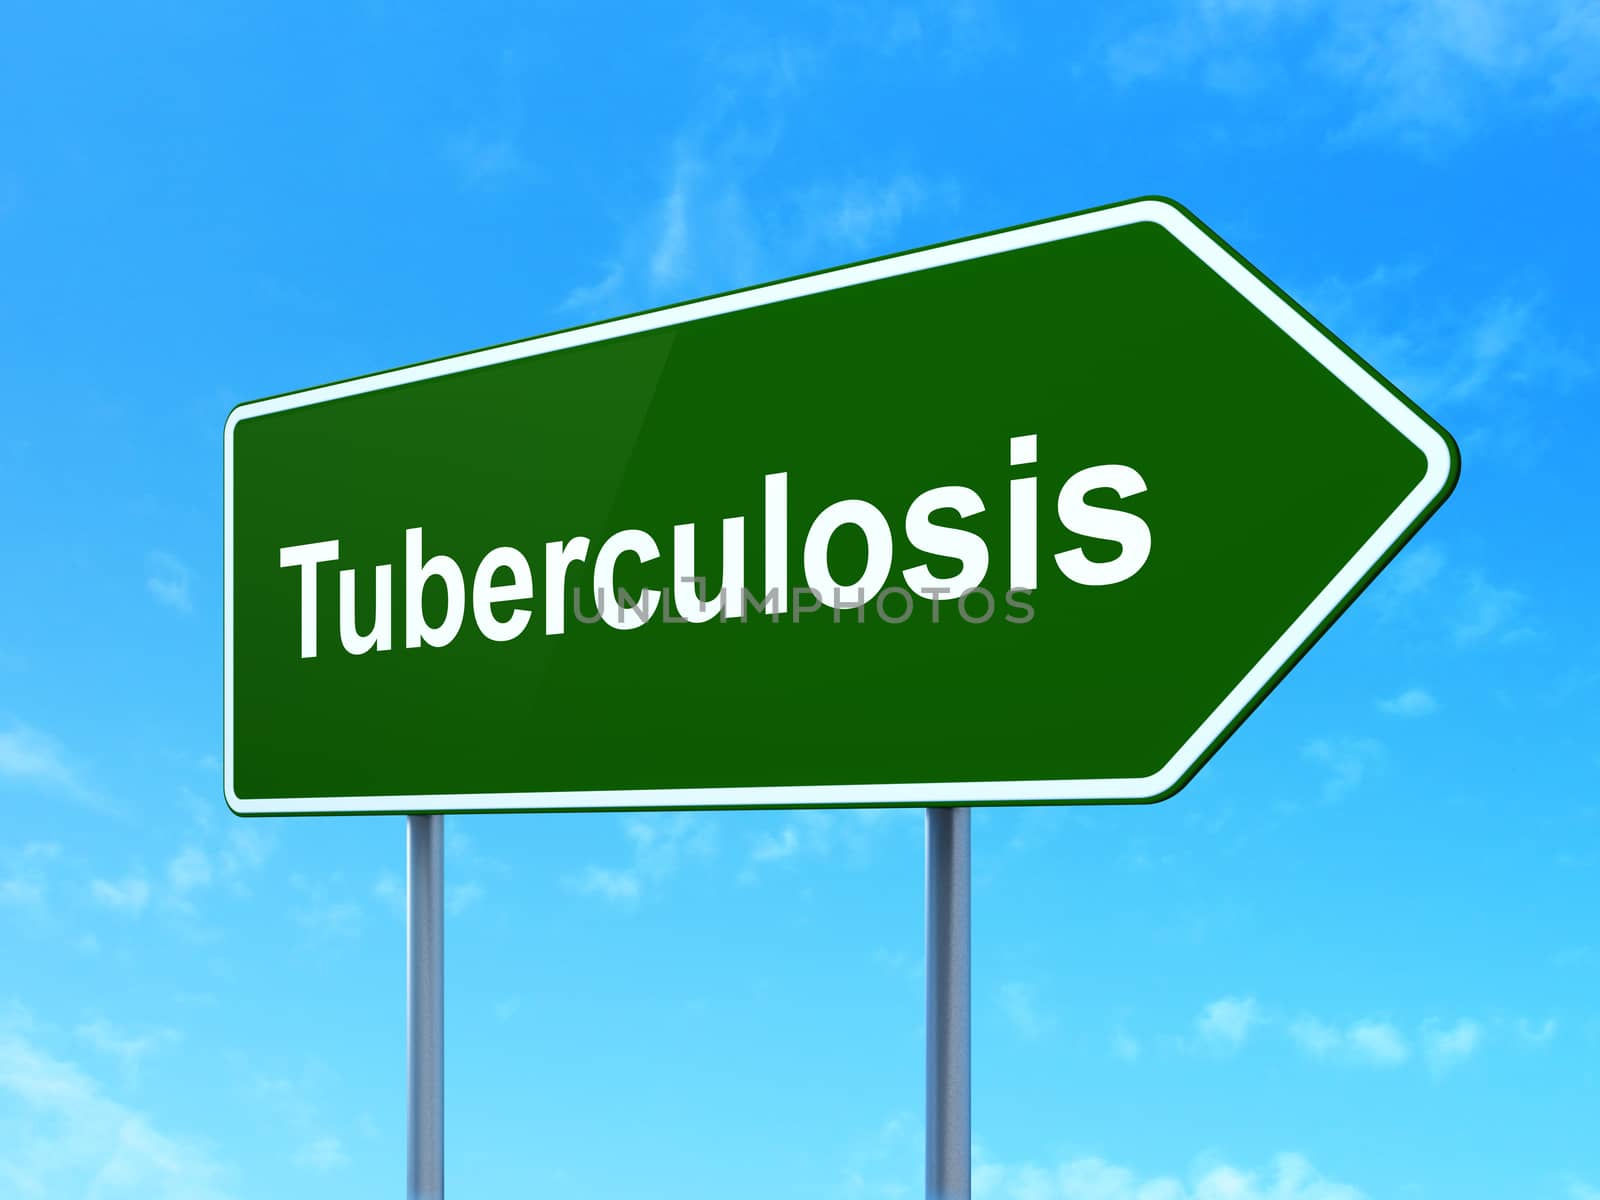 Healthcare concept: Tuberculosis on green road highway sign, clear blue sky background, 3D rendering